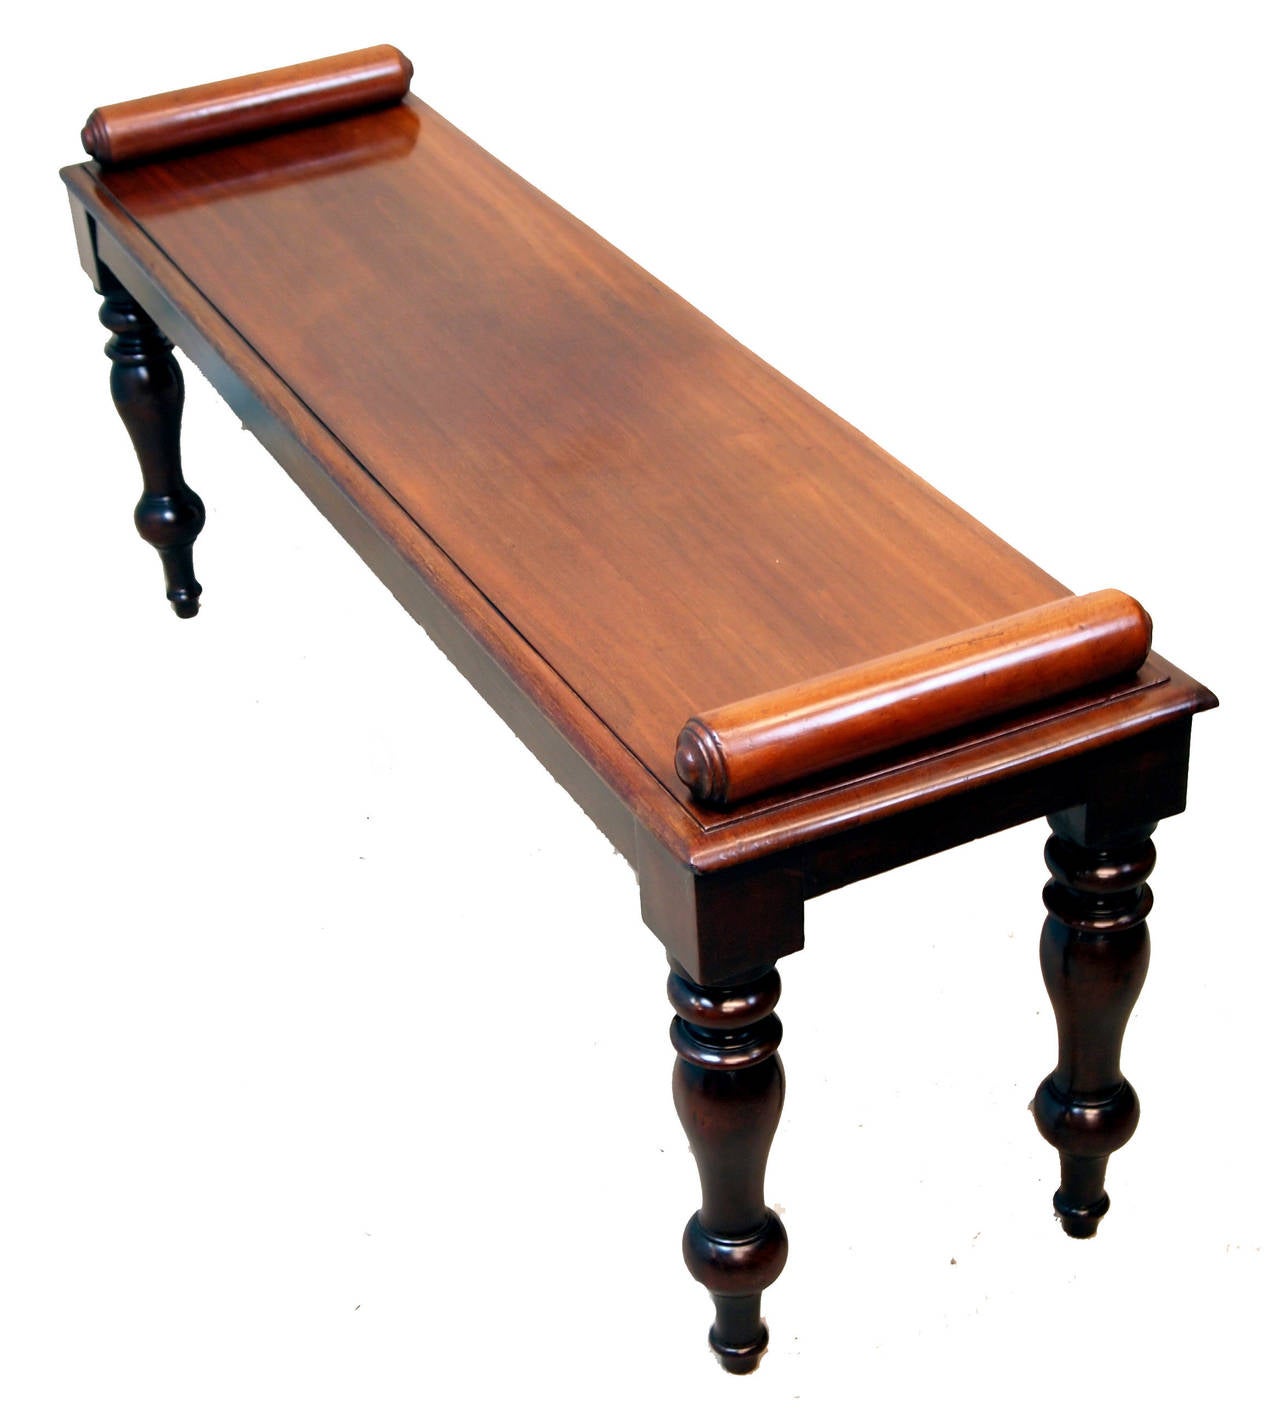 A Very Good Quality Mid 19th Century Mahogany	
Window Seat, Or Hall Bench, Having Superbly	
Figured Top With Turned Rolls Raised On	
Elegant Turned Legs